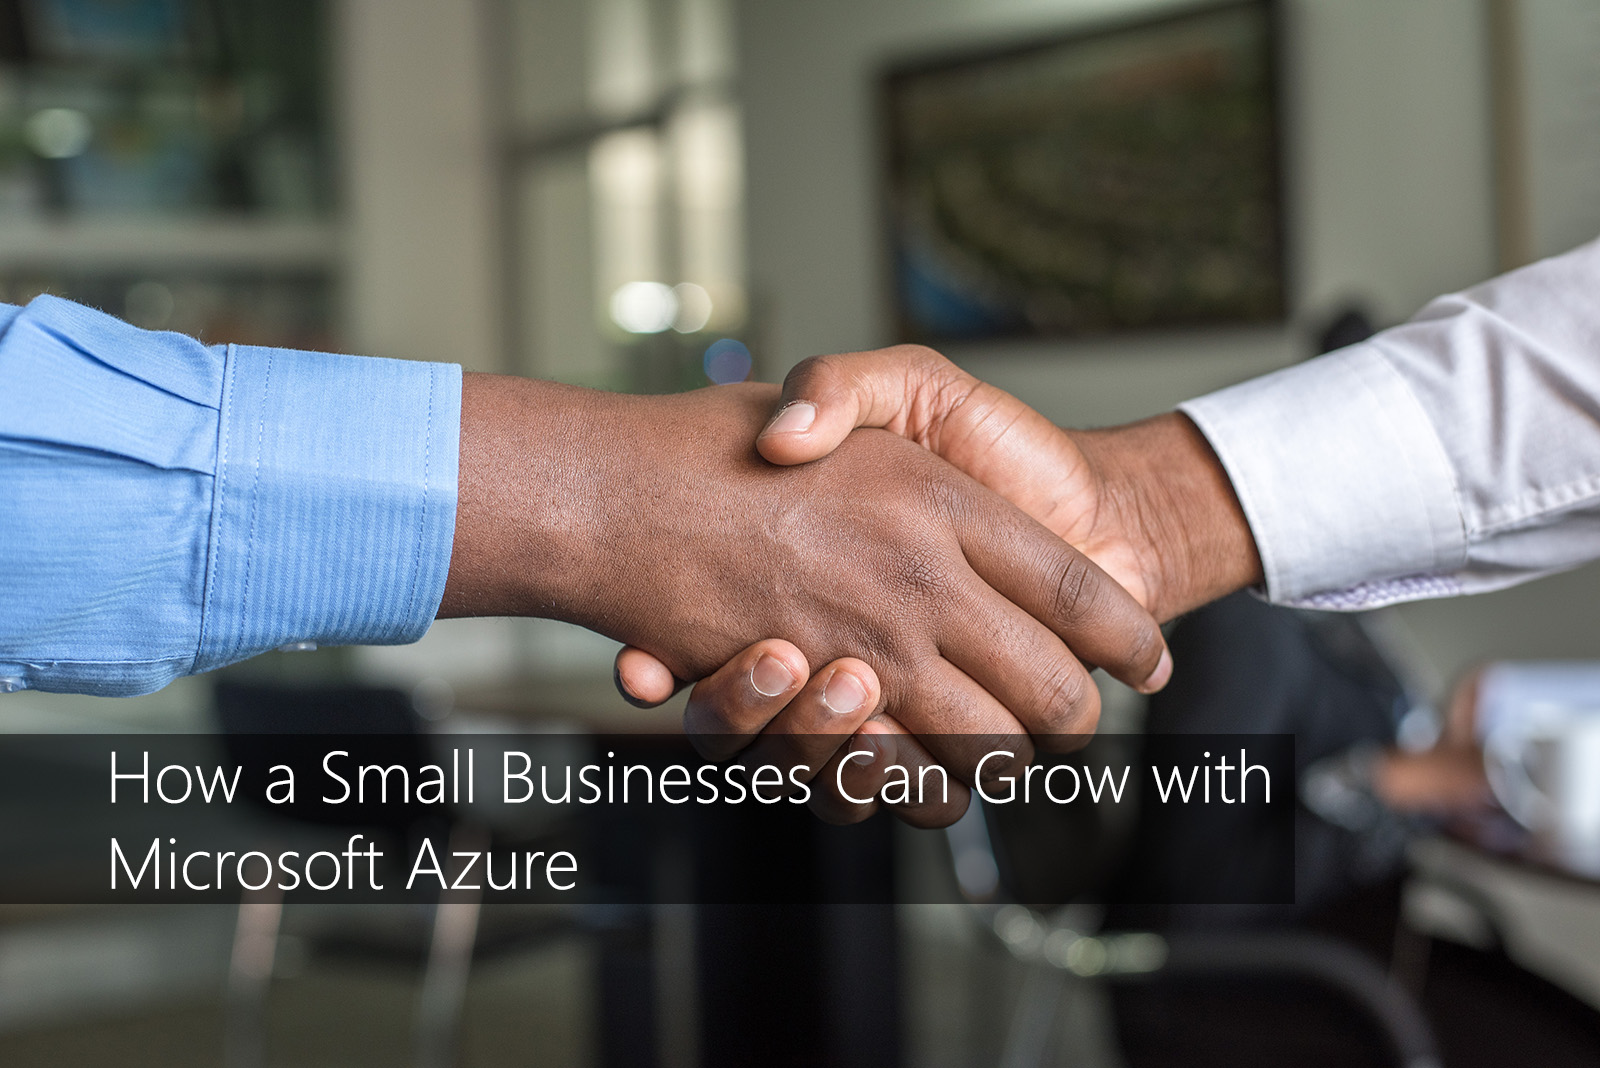 TMC-blog-how-a-small-businesses-can-grow-with-microsoft-azure